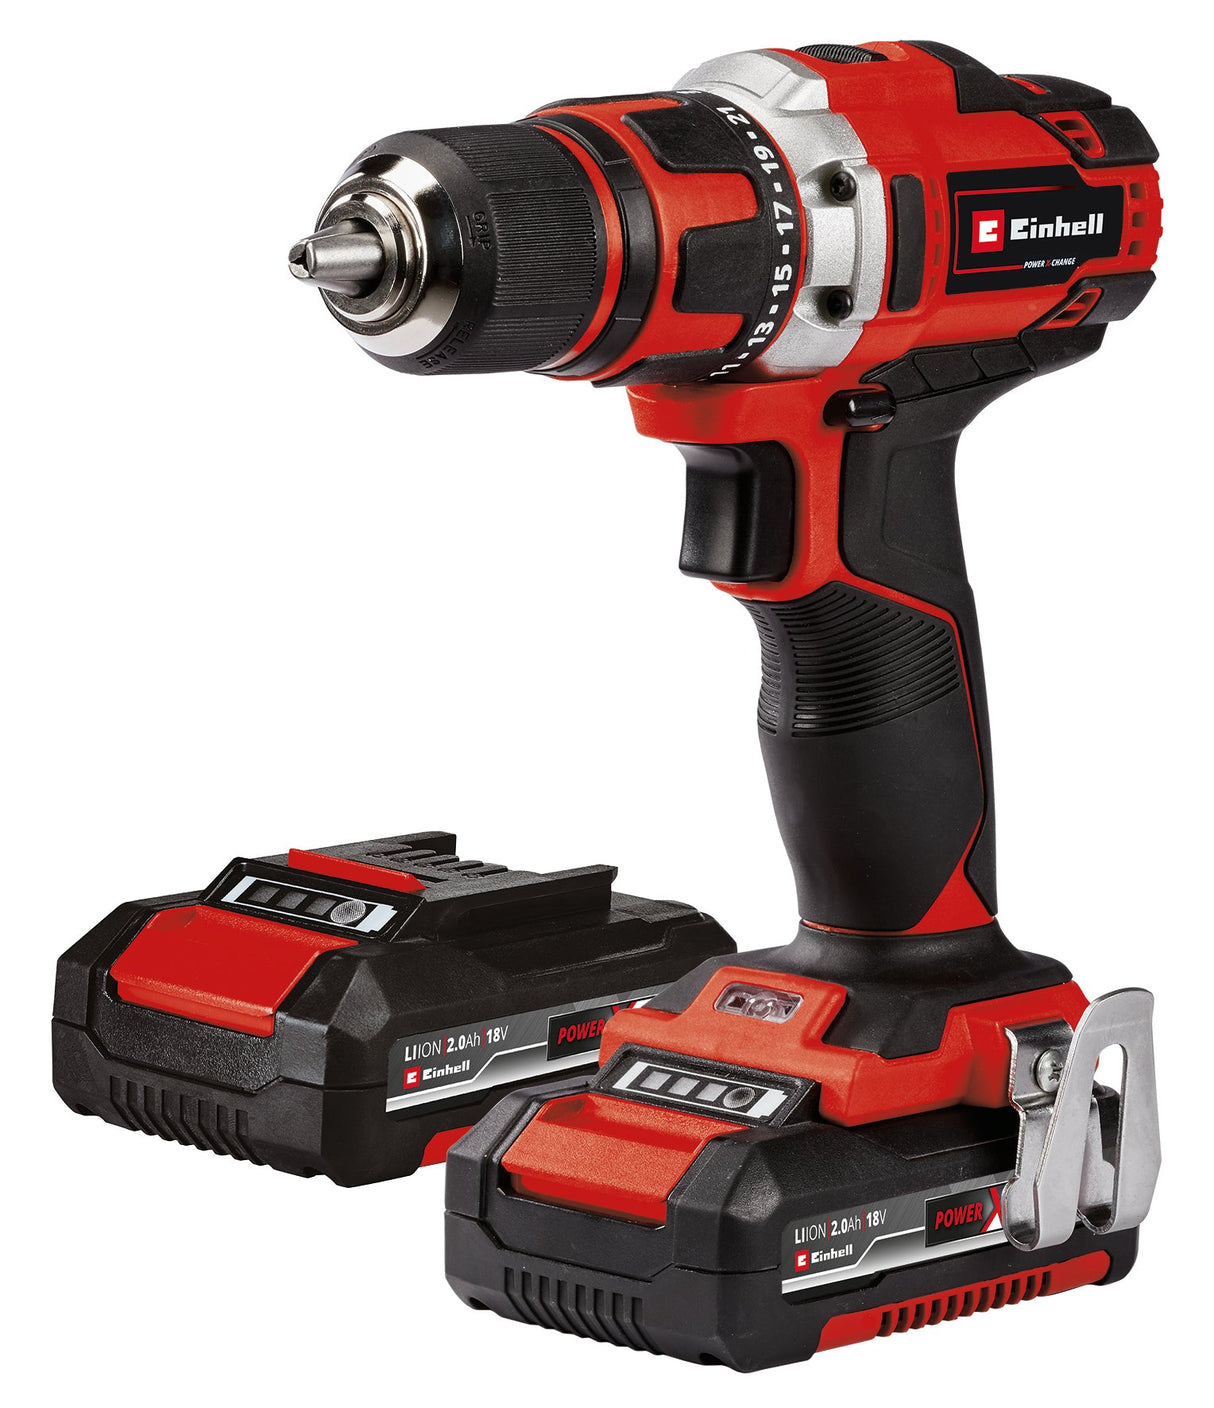 Einhell Power Tools 18V 1/2” Cordless Drill Driver Kit with (2) 2.0 Ah batteries, charger and case